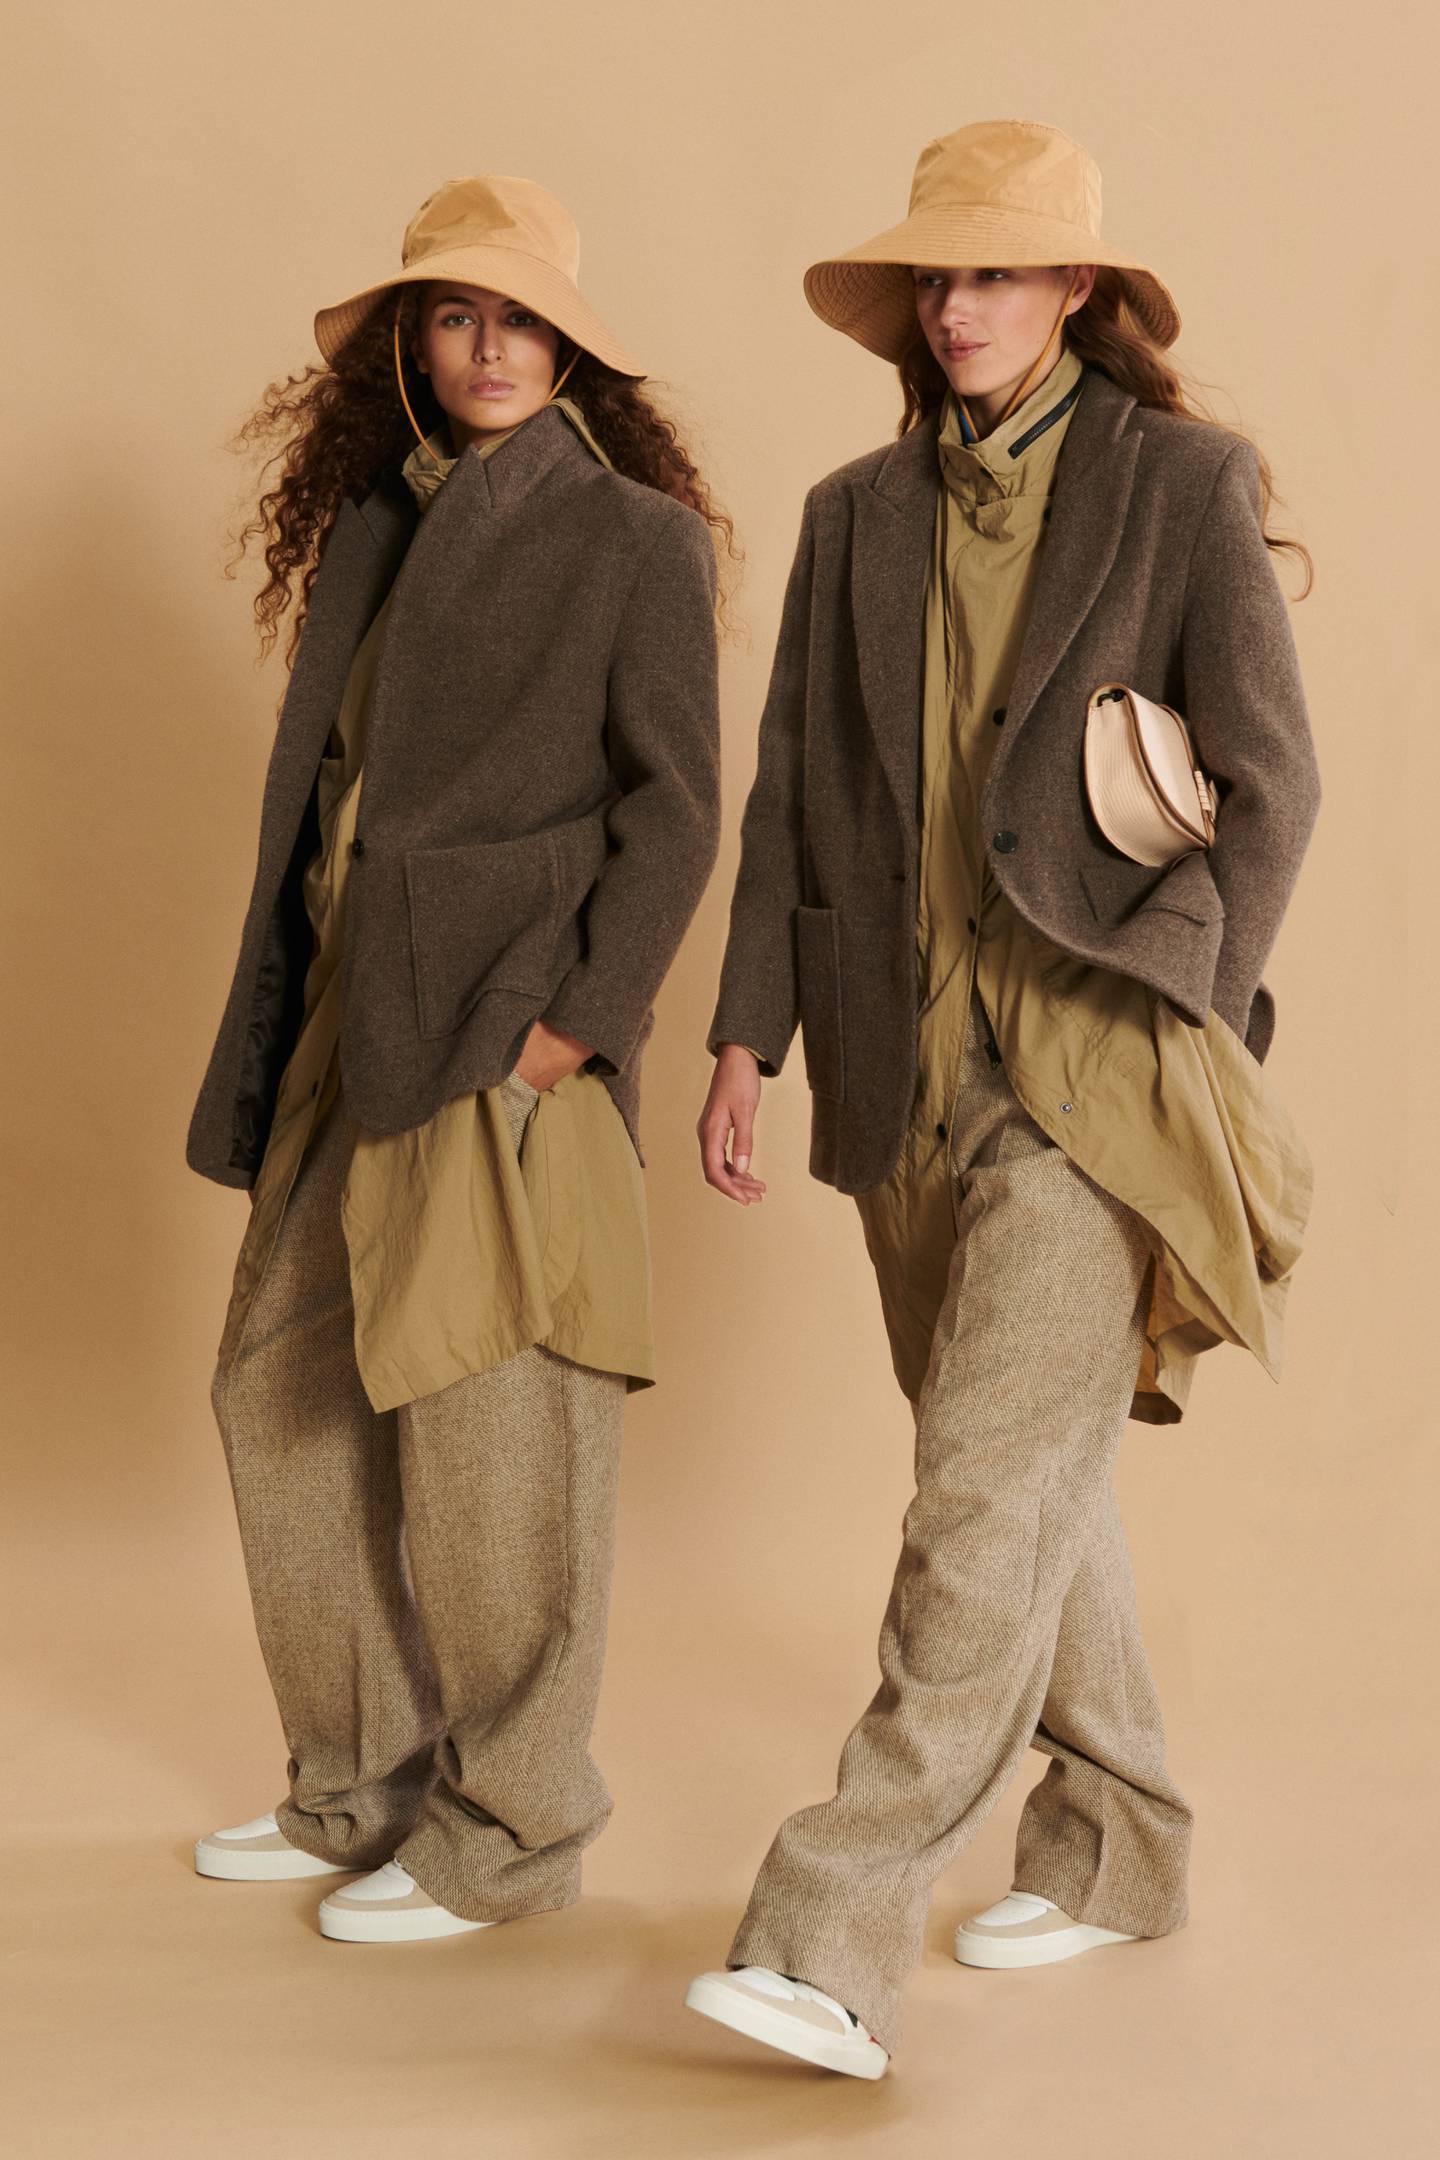 Two models in identical outfits by Ba&sh.